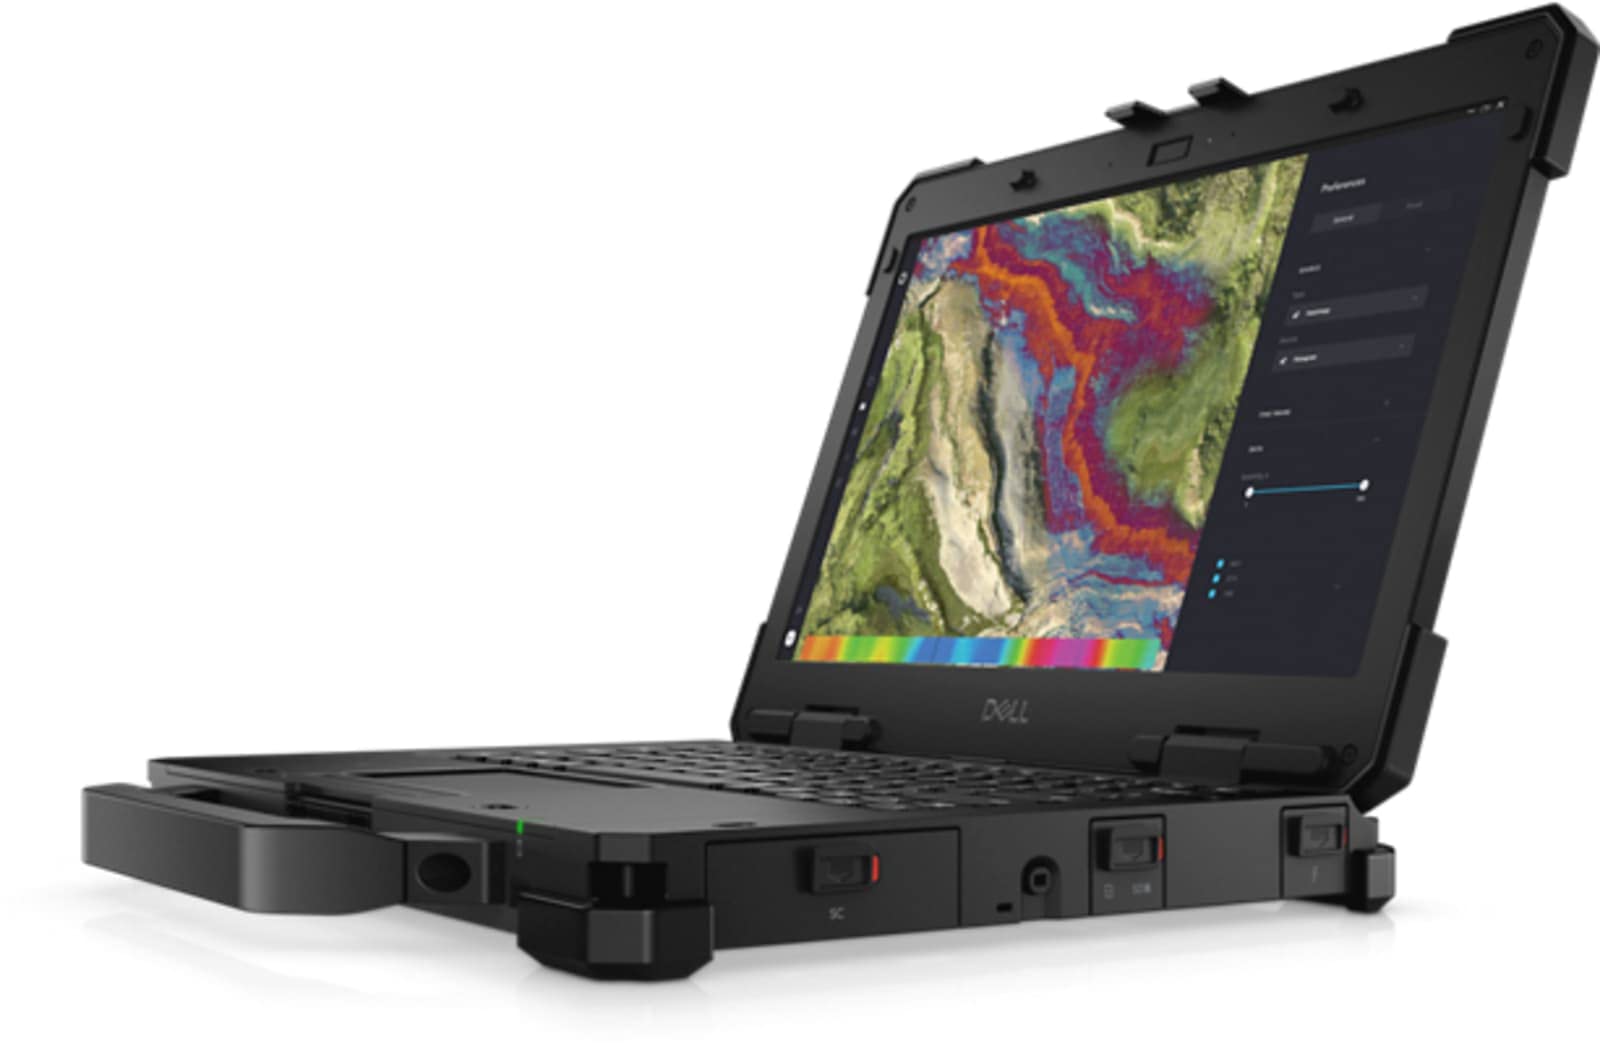 Dell Latitude Rugged Extreme 7330 Laptop (2022) | 13.3" FHD Touch | Core i5-512GB SSD - 8GB RAM | 4 Cores @ 4.4 GHz - 11th Gen CPU Win 11 Pro